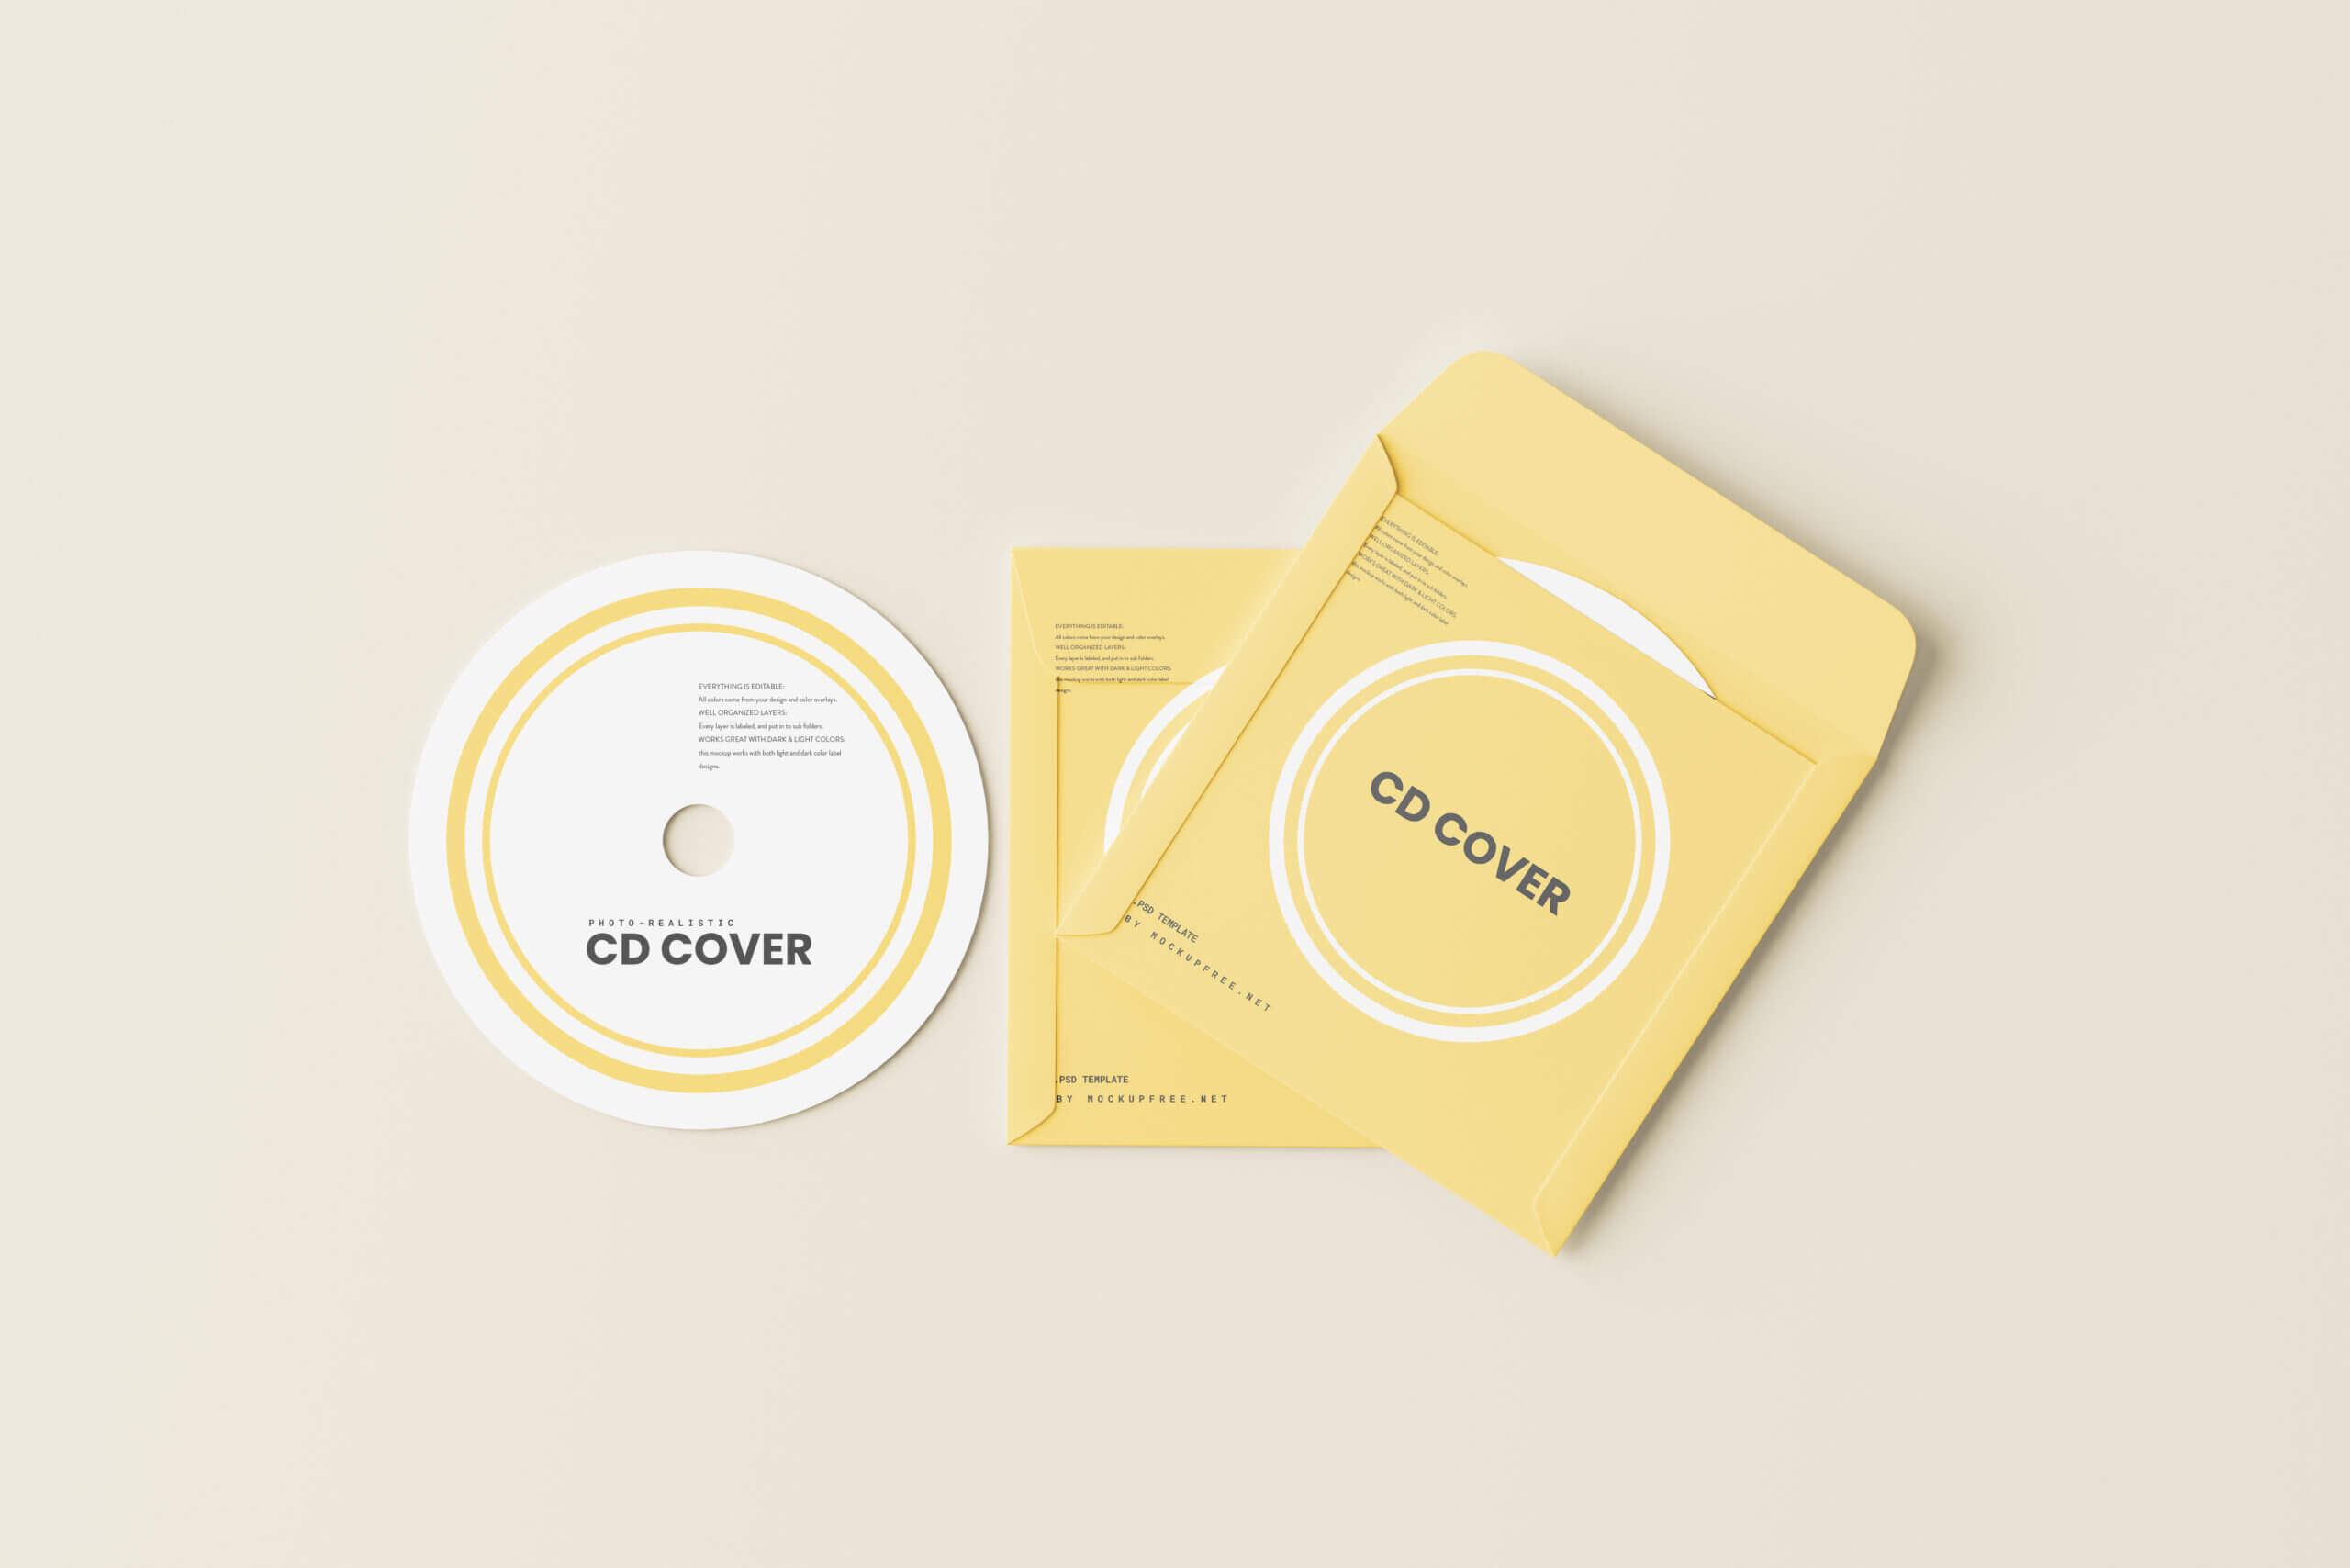 5 Free Paper CD Cover & Disc Mockup PSD Files